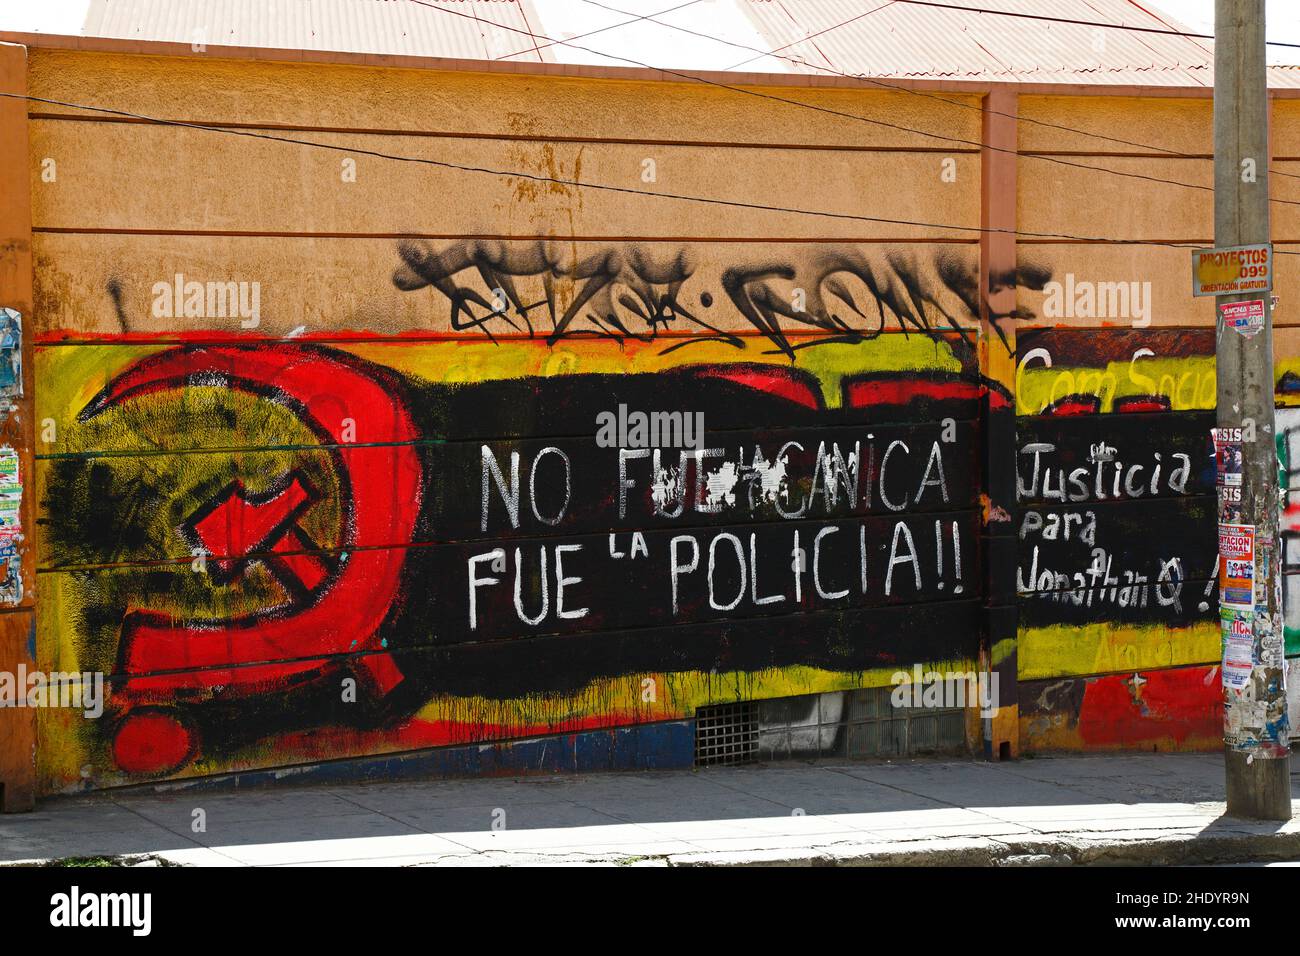 'It was (not) the police. Justice for Jonathan Q' protest slogan painted over Communist Party mural, La Paz, Bolivia. Jonathan Quispe Vila was a student at the UPEA (Universidad Pública de El Alto) university. He died on 24 May 2018 after taking part in protests demanding a budget increase for the university that saw violent clashes with the police. He was shot by a marble (canica) in circumstances that were unclear, initially the police denied responsibility. A police lieutenant, Cristian Casanova, was sentenced to 5 years in jail for his death the following year after an investigation. Stock Photo